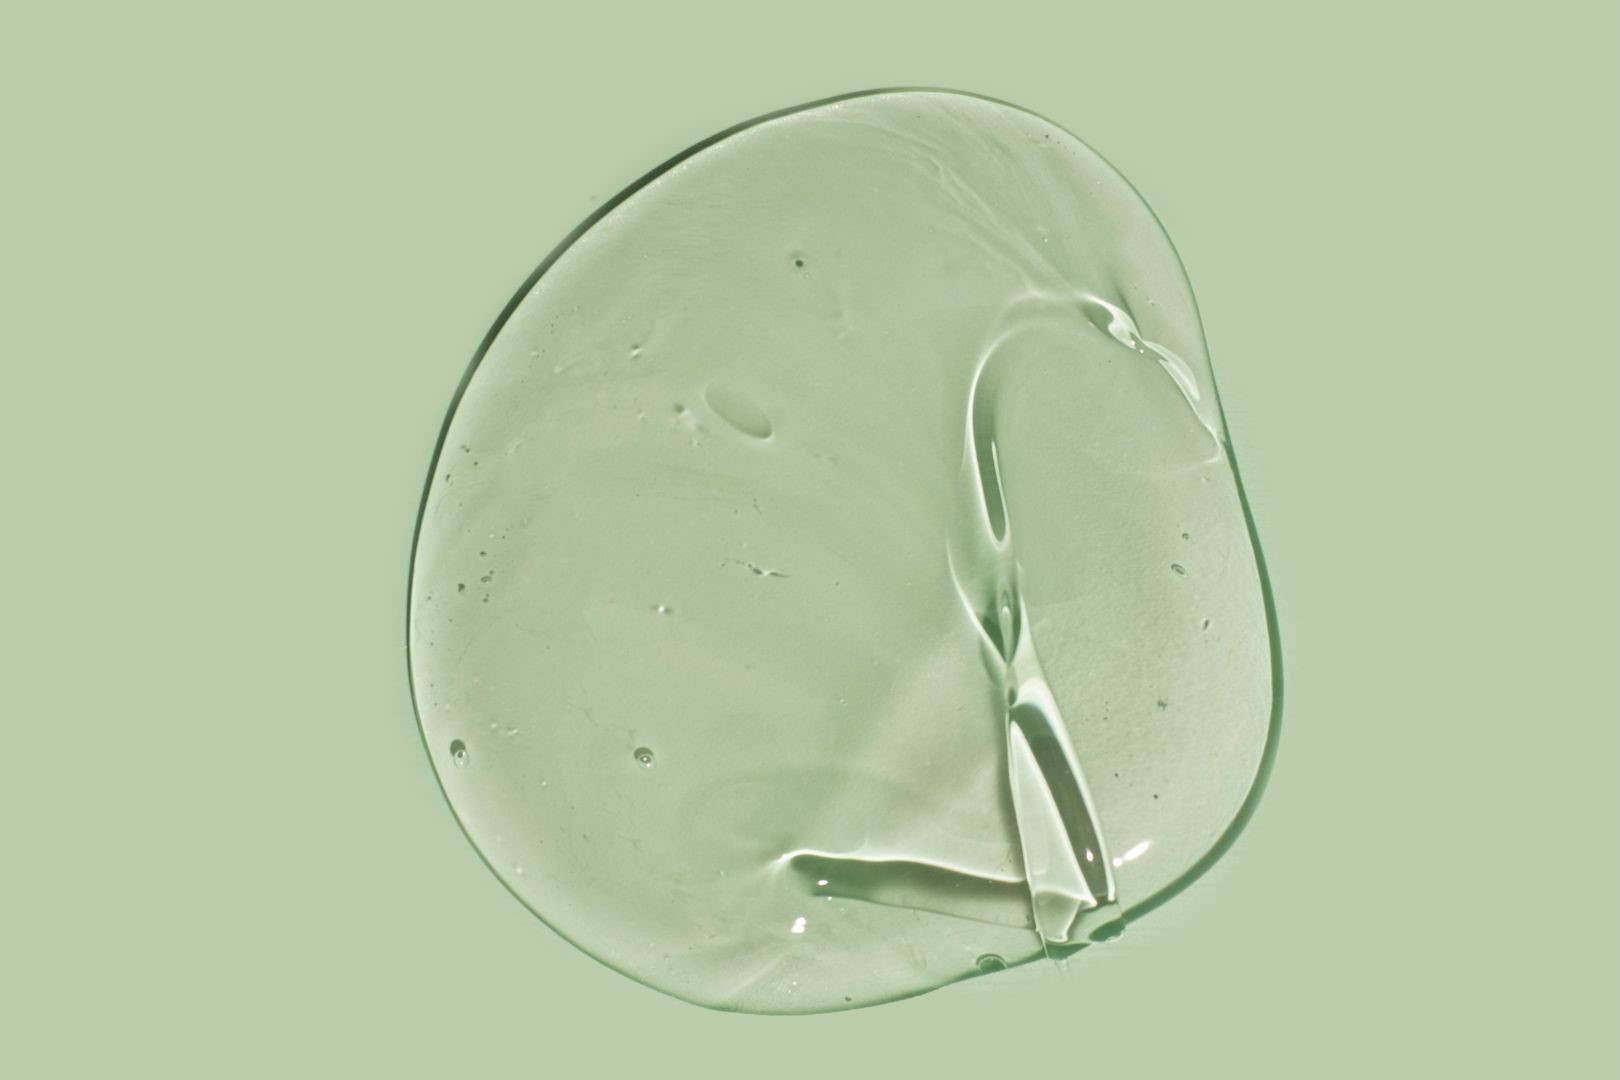 clear liquid on a green background 